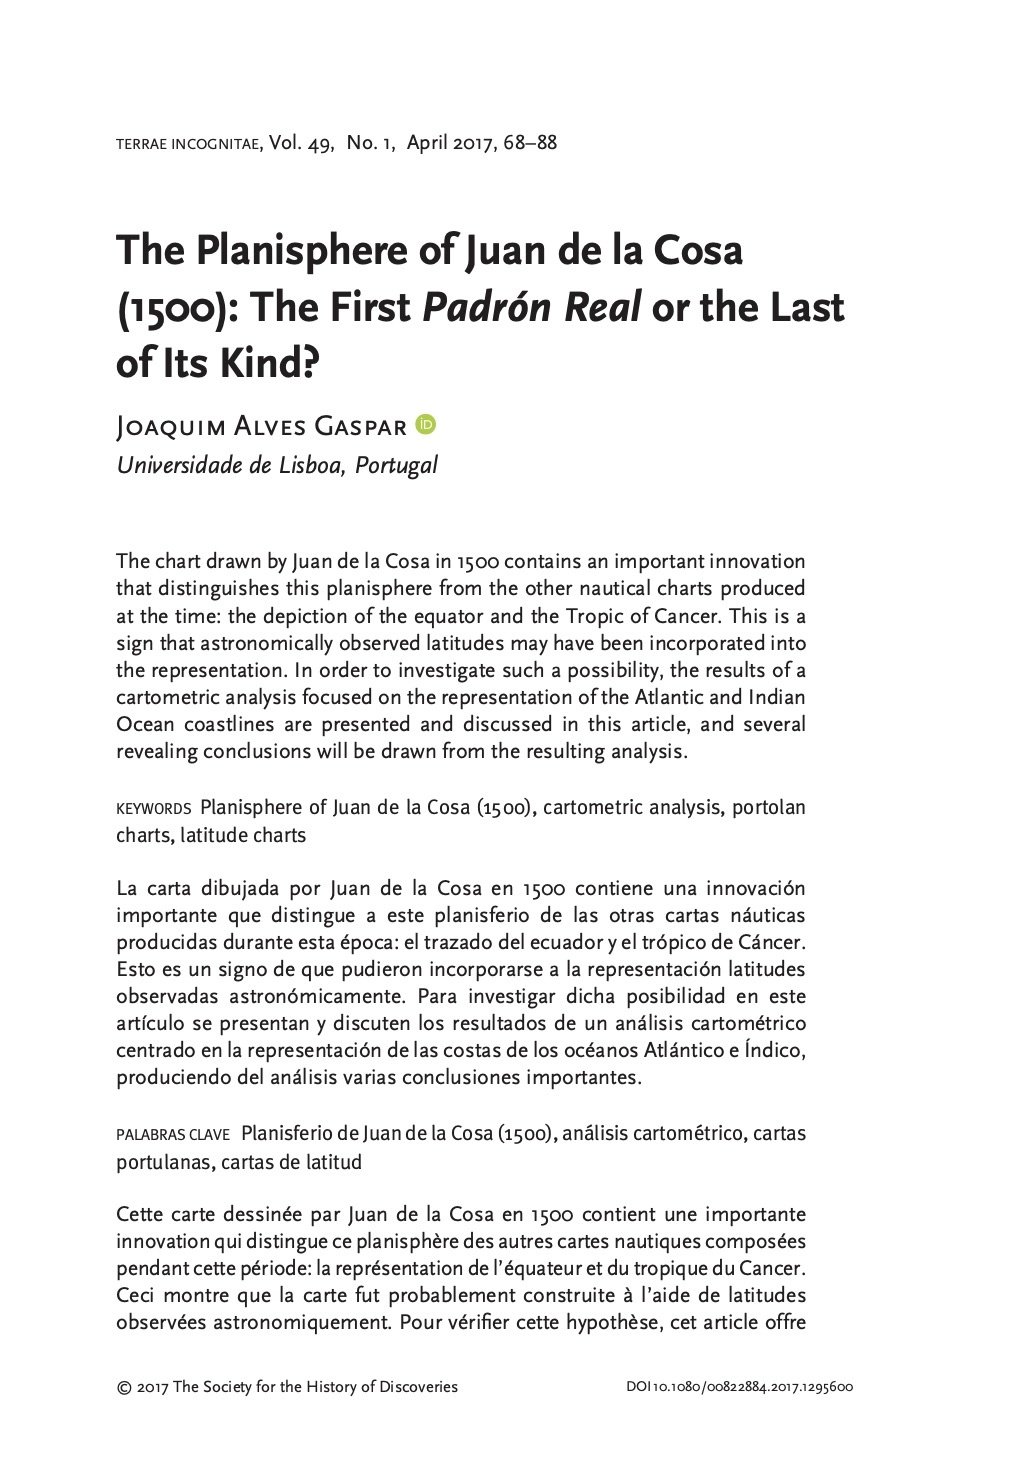 The Planisphere of Juan de la Cosa (1500): The First Padrón Real or the Last of Its Kind?, Capa